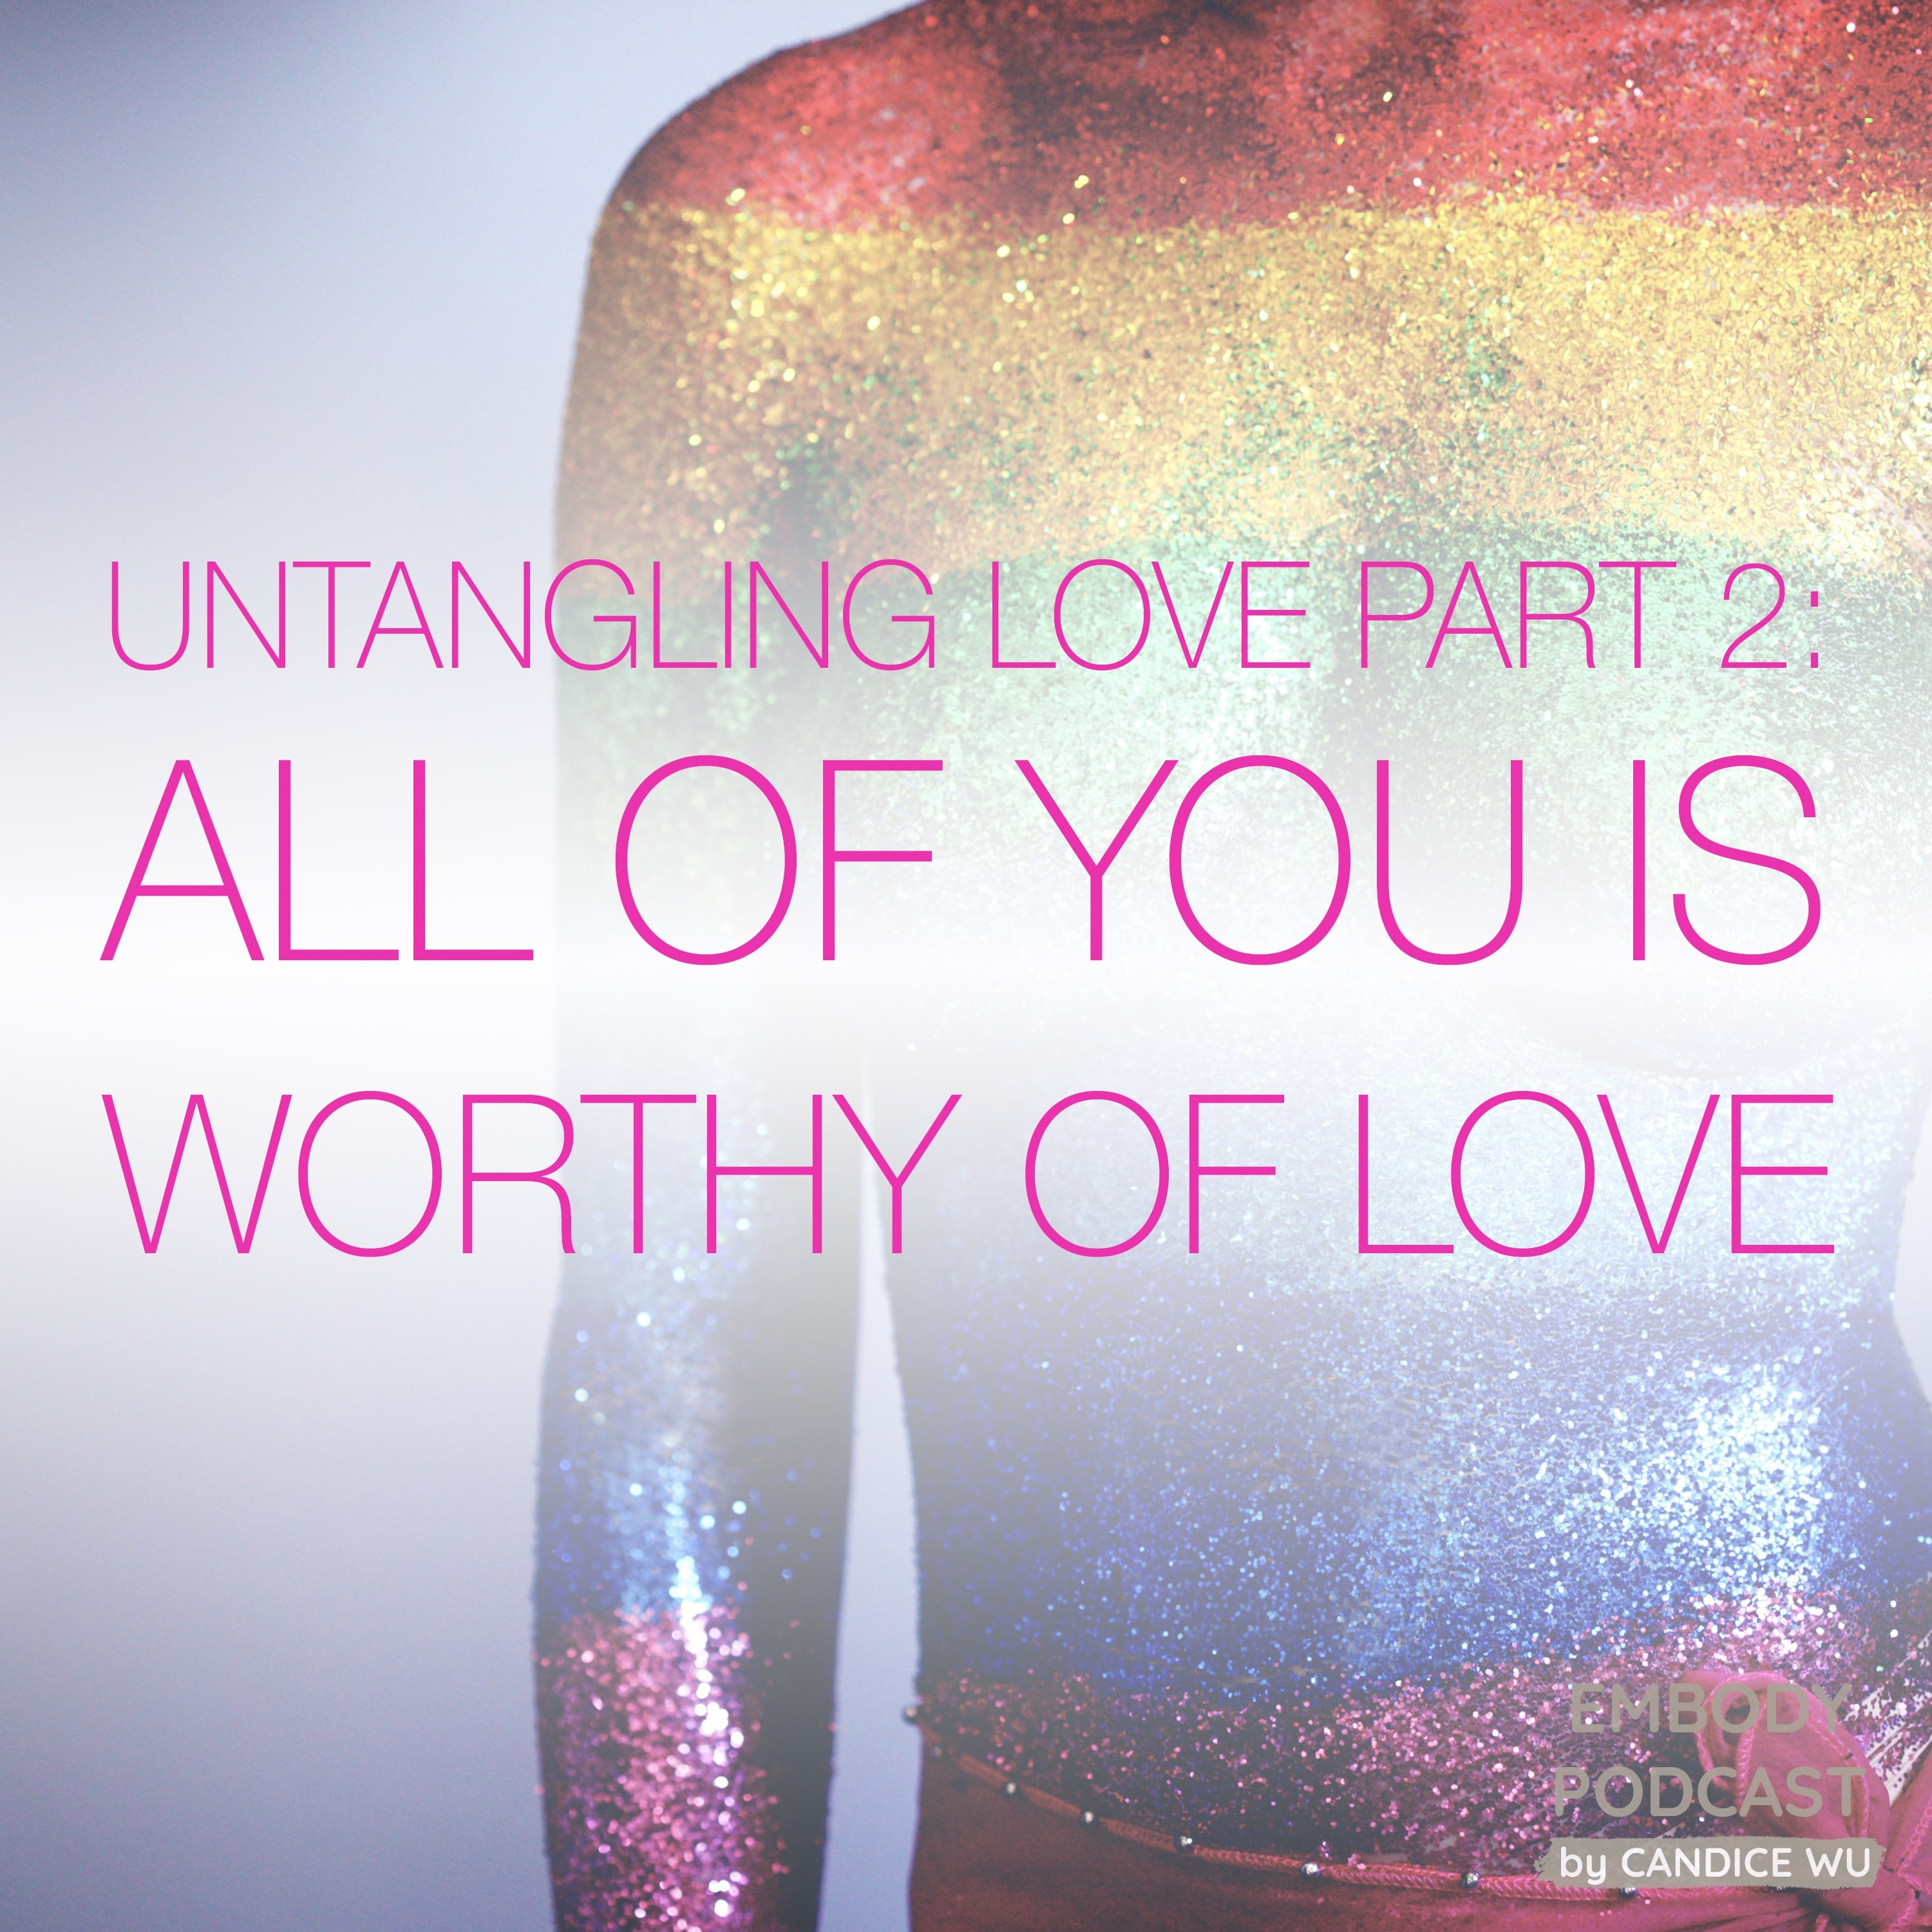 65: Untangling Love Part 2: All of You is Worthy of Love